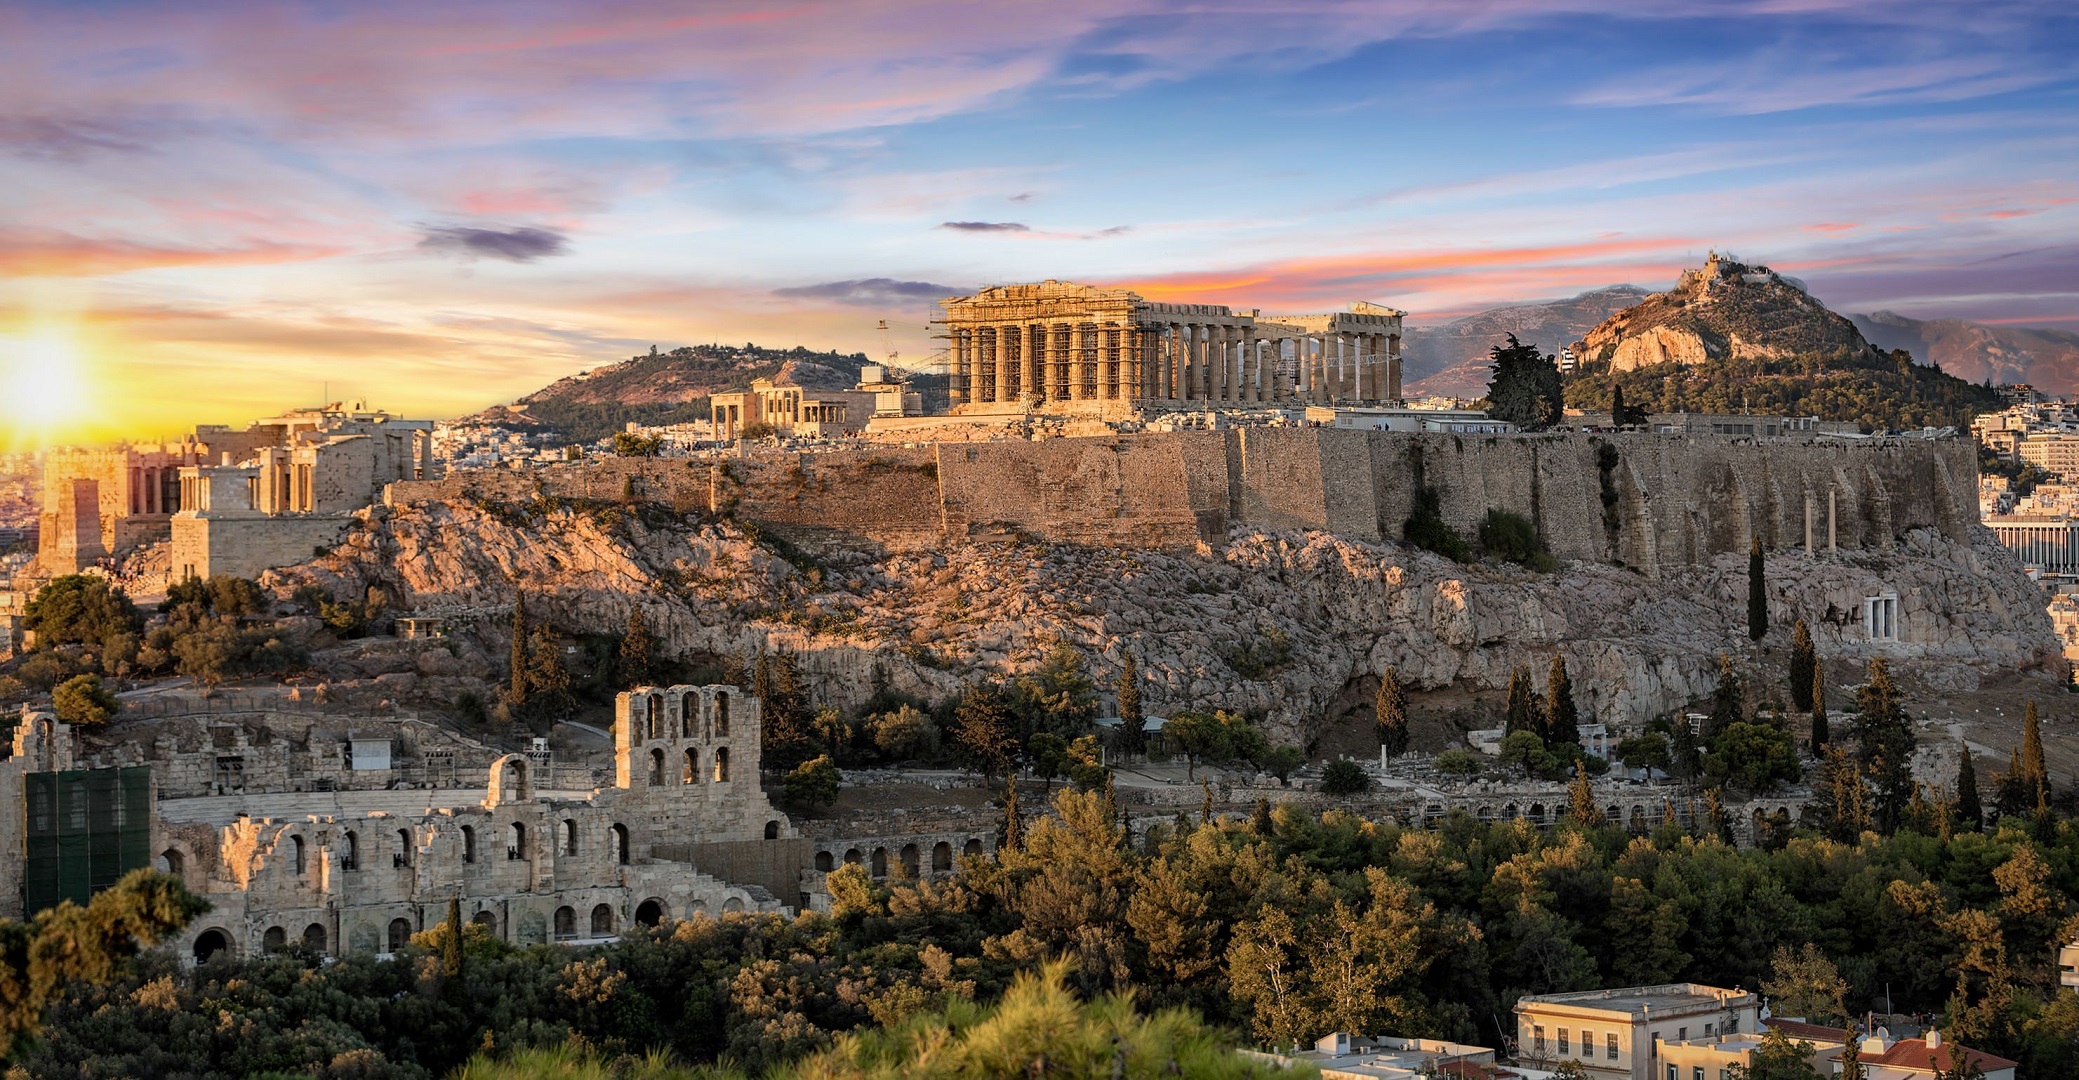 General 2079x1080 Athens Greece ruins architecture sunset glow